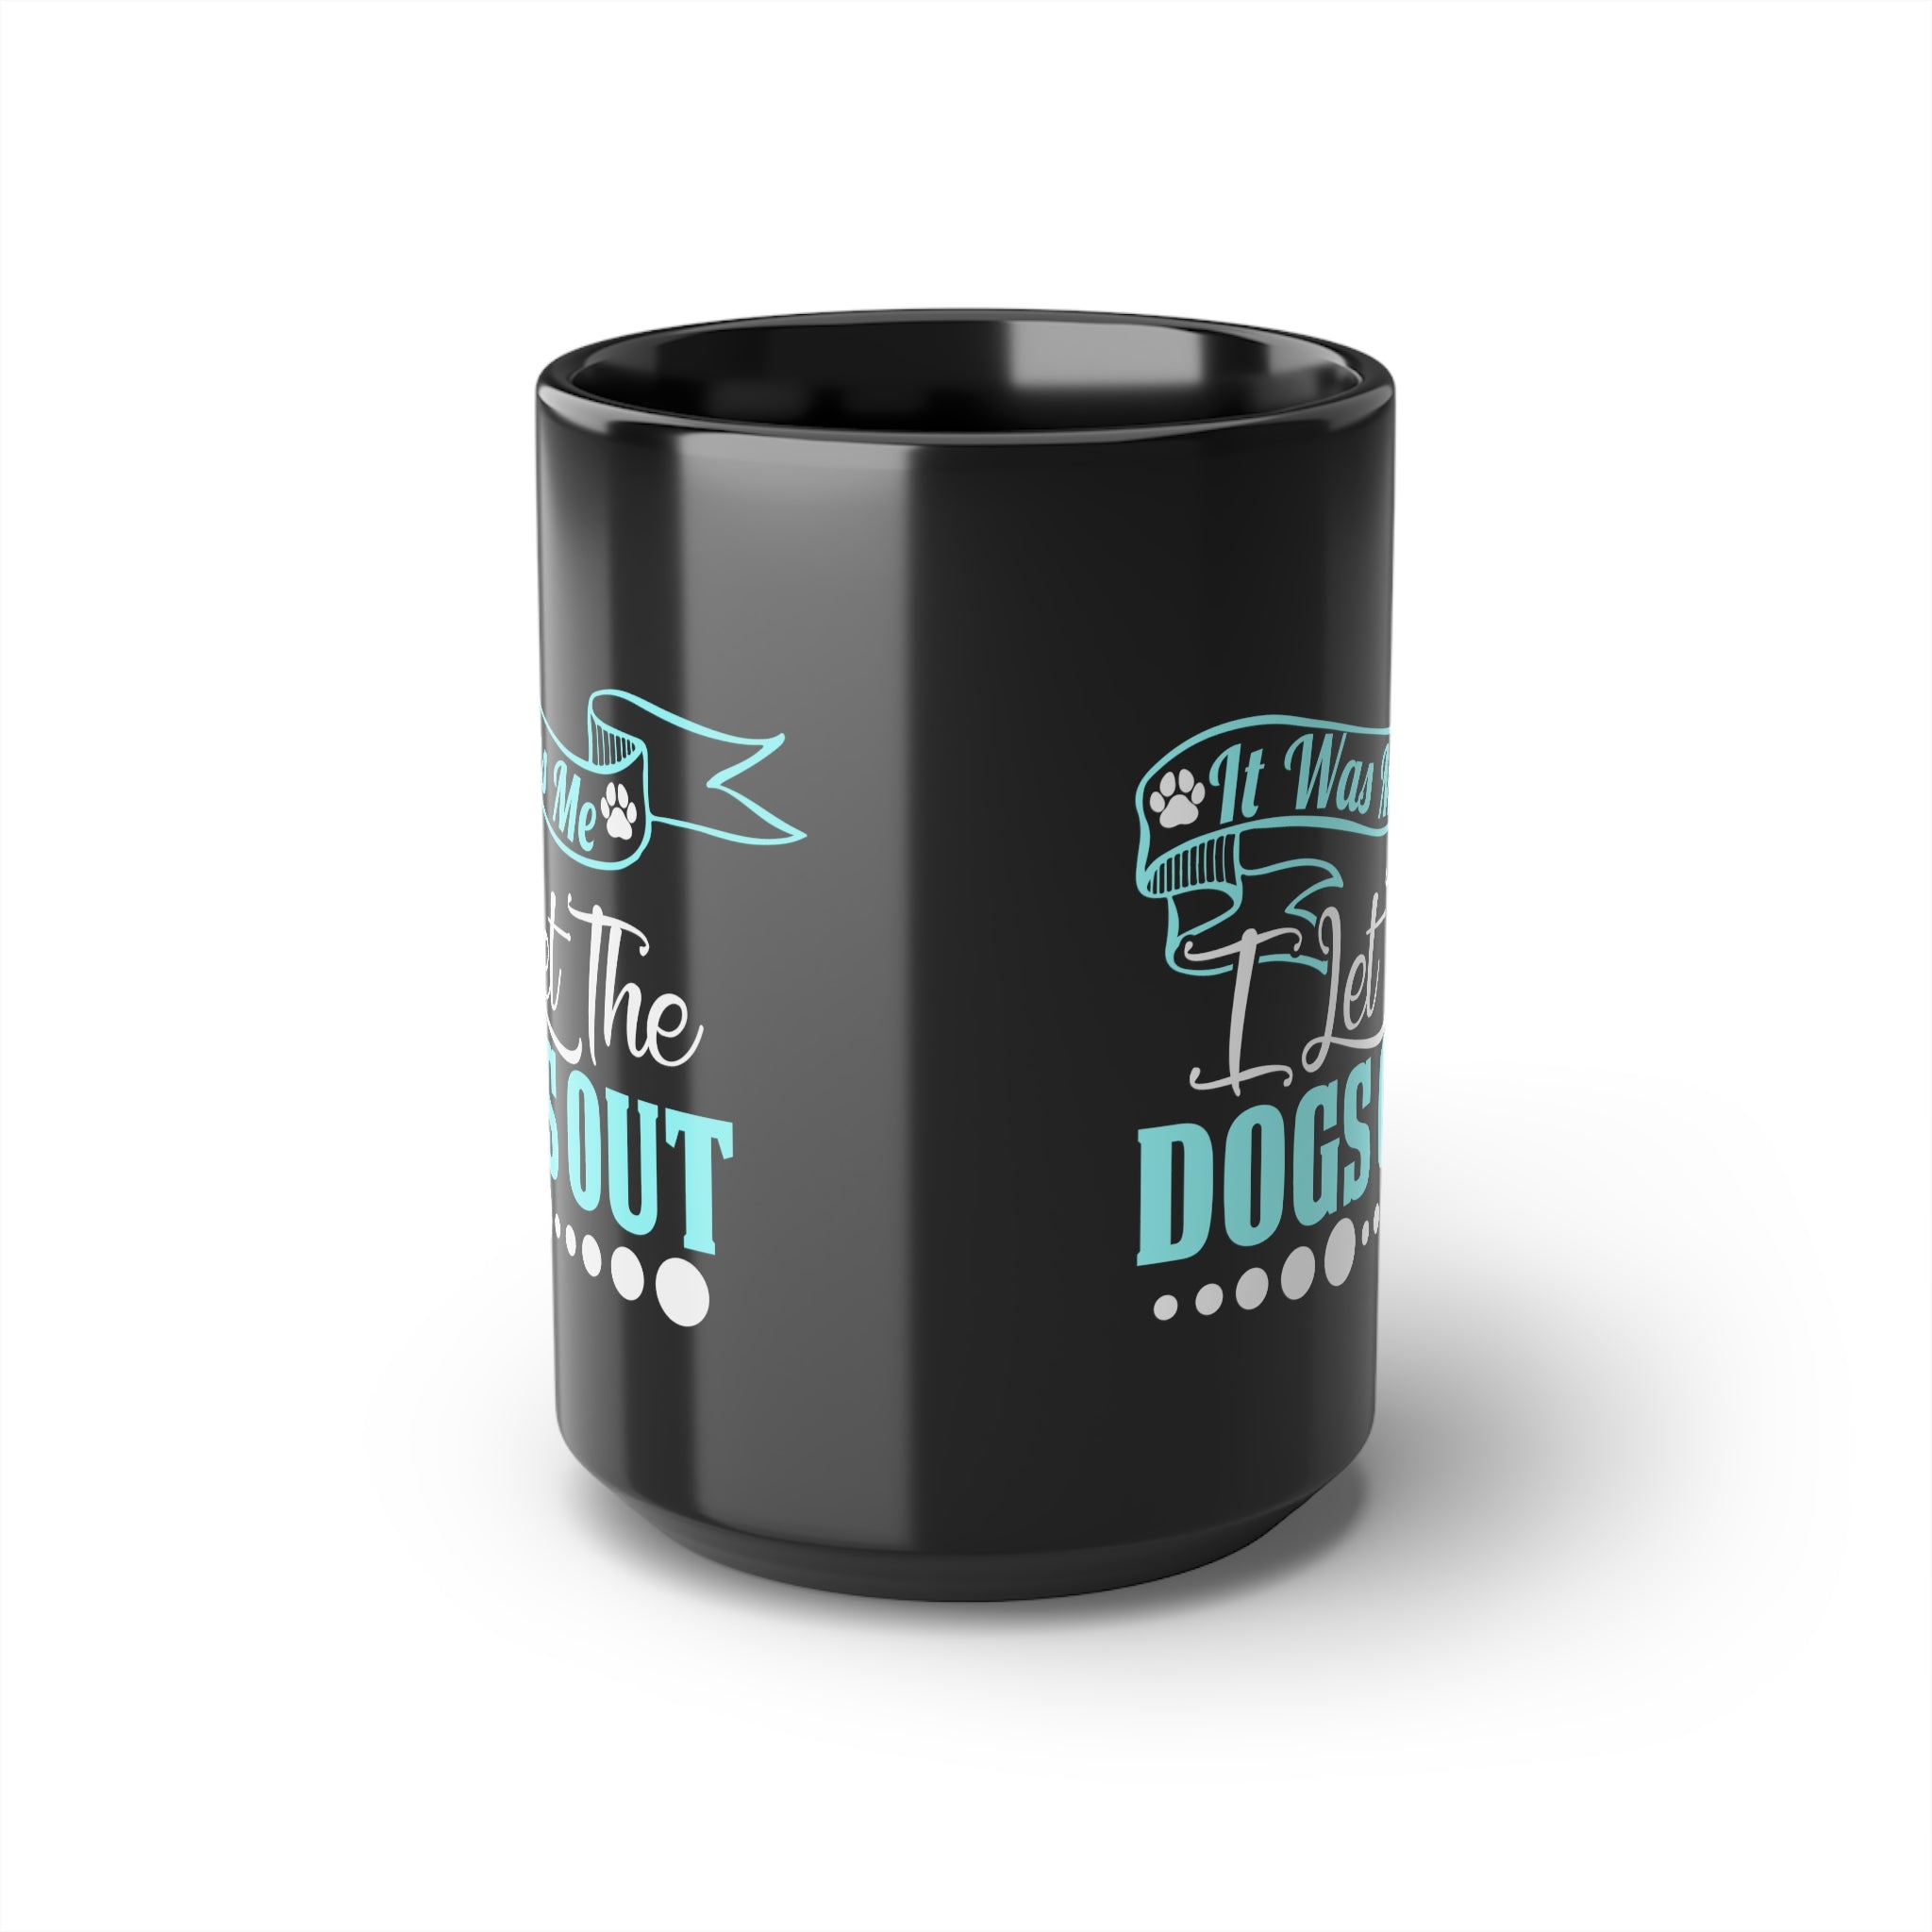 Dog Lovers Gift Funny Who Let The Dogs Out Black Coffee Mug 15 ounce Coffee Cup Tea Cup Gift For Dog Owner